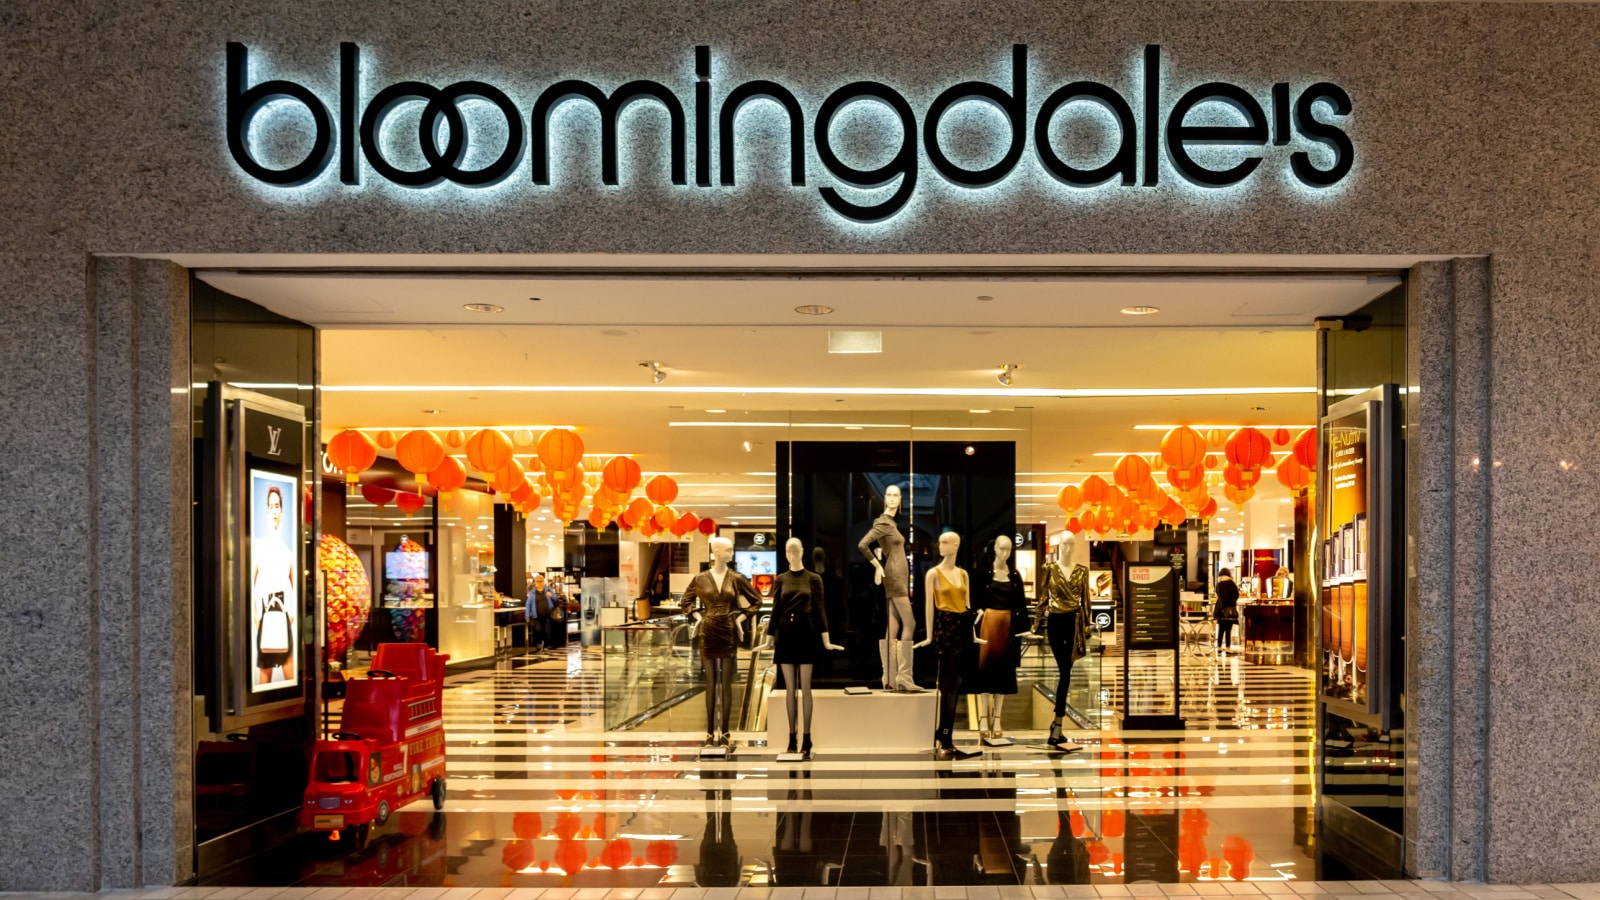 Tysons Corner, Virginia, USA- January 14, 2020: Bloomingdale's storefront in Tysons Corner Center, Virginia, USA. Bloomingdale's Inc. is an American department store chain.